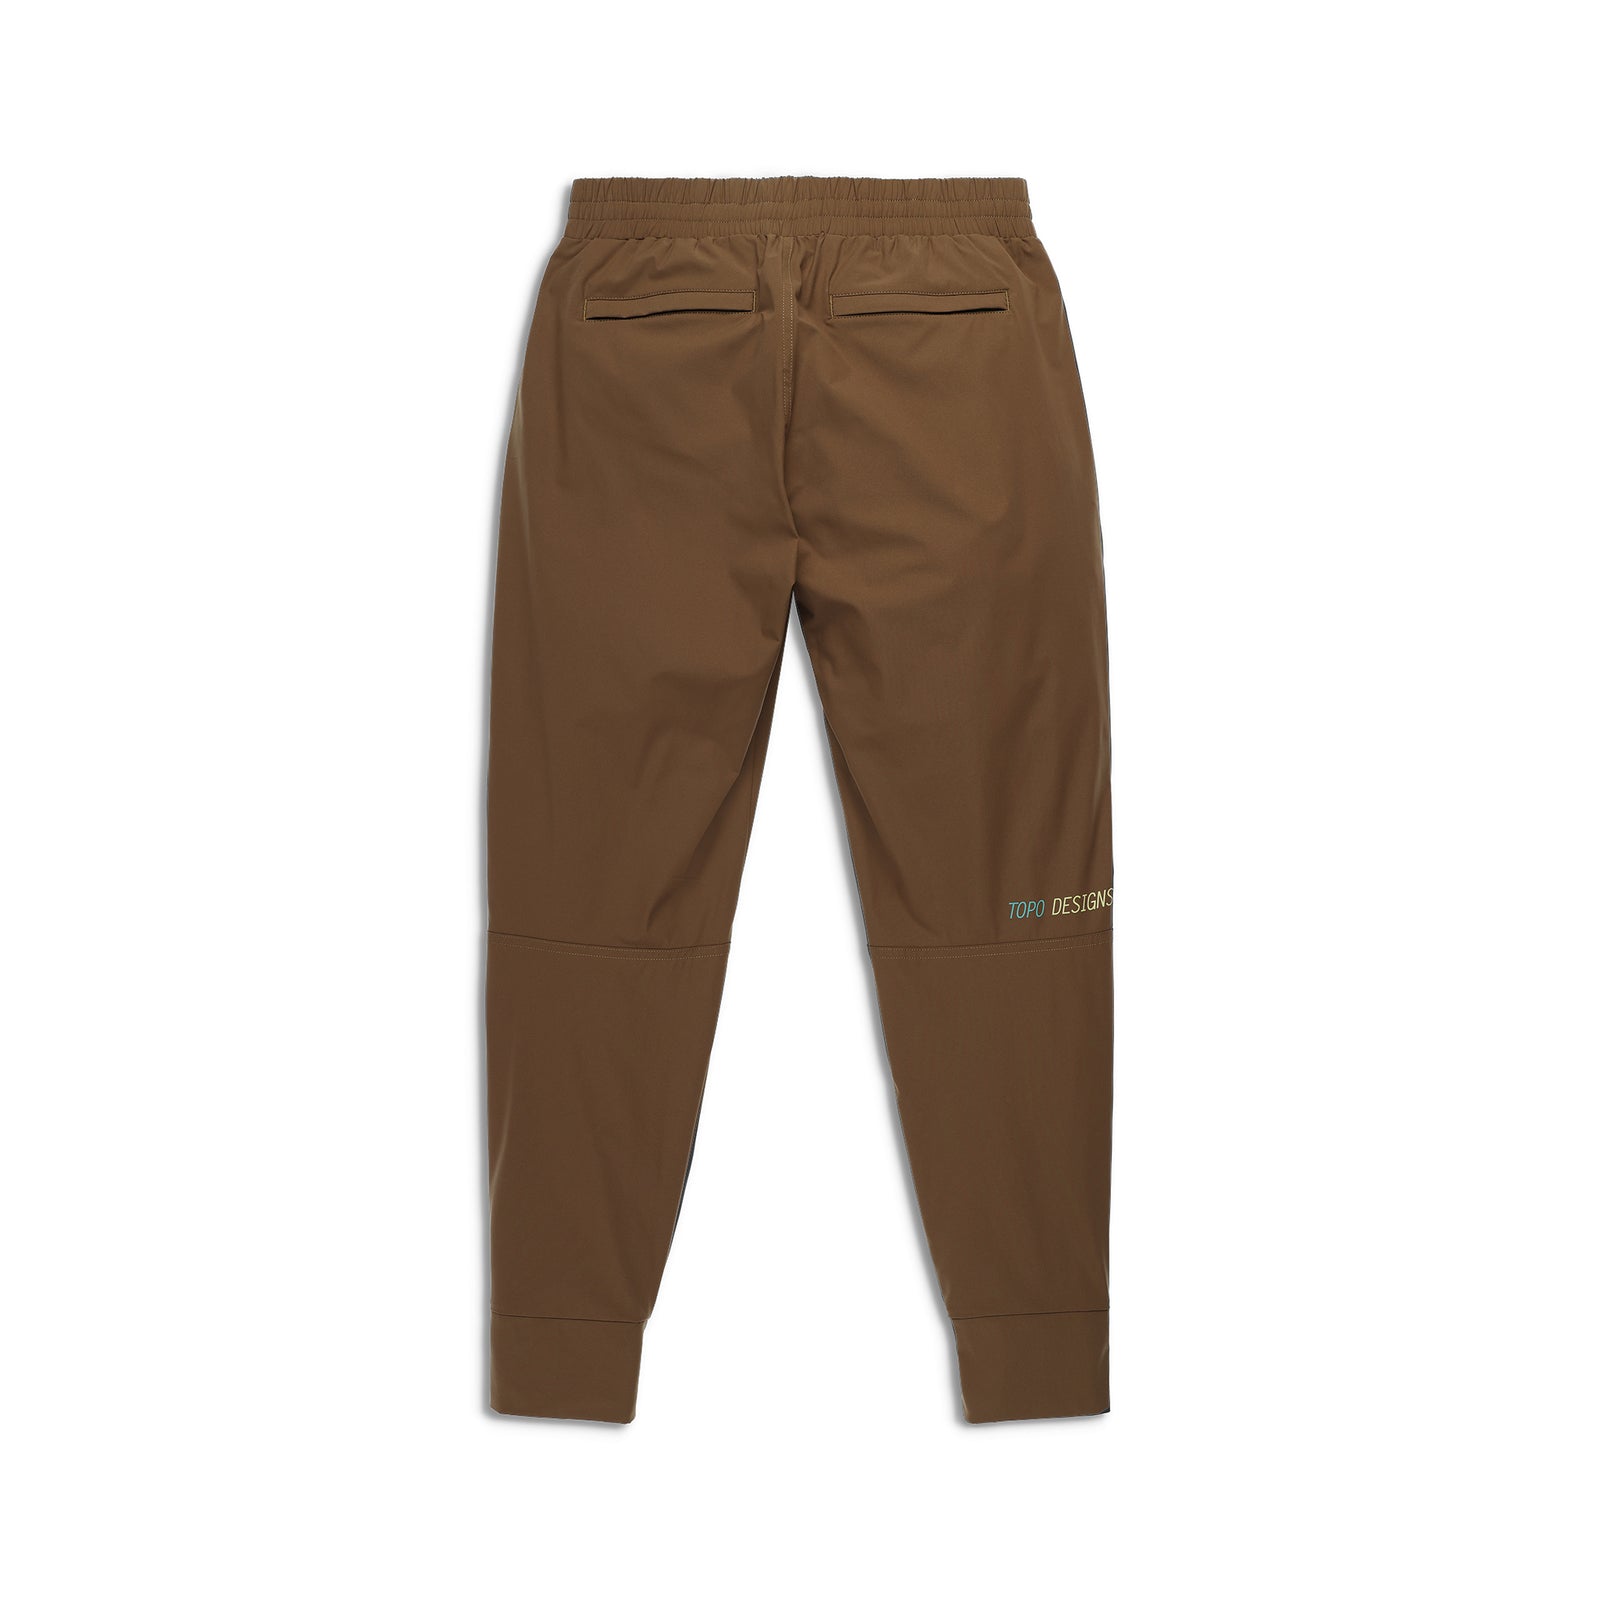 Back View of Topo Designs Global Jogger - Women's in "Desert Palm"